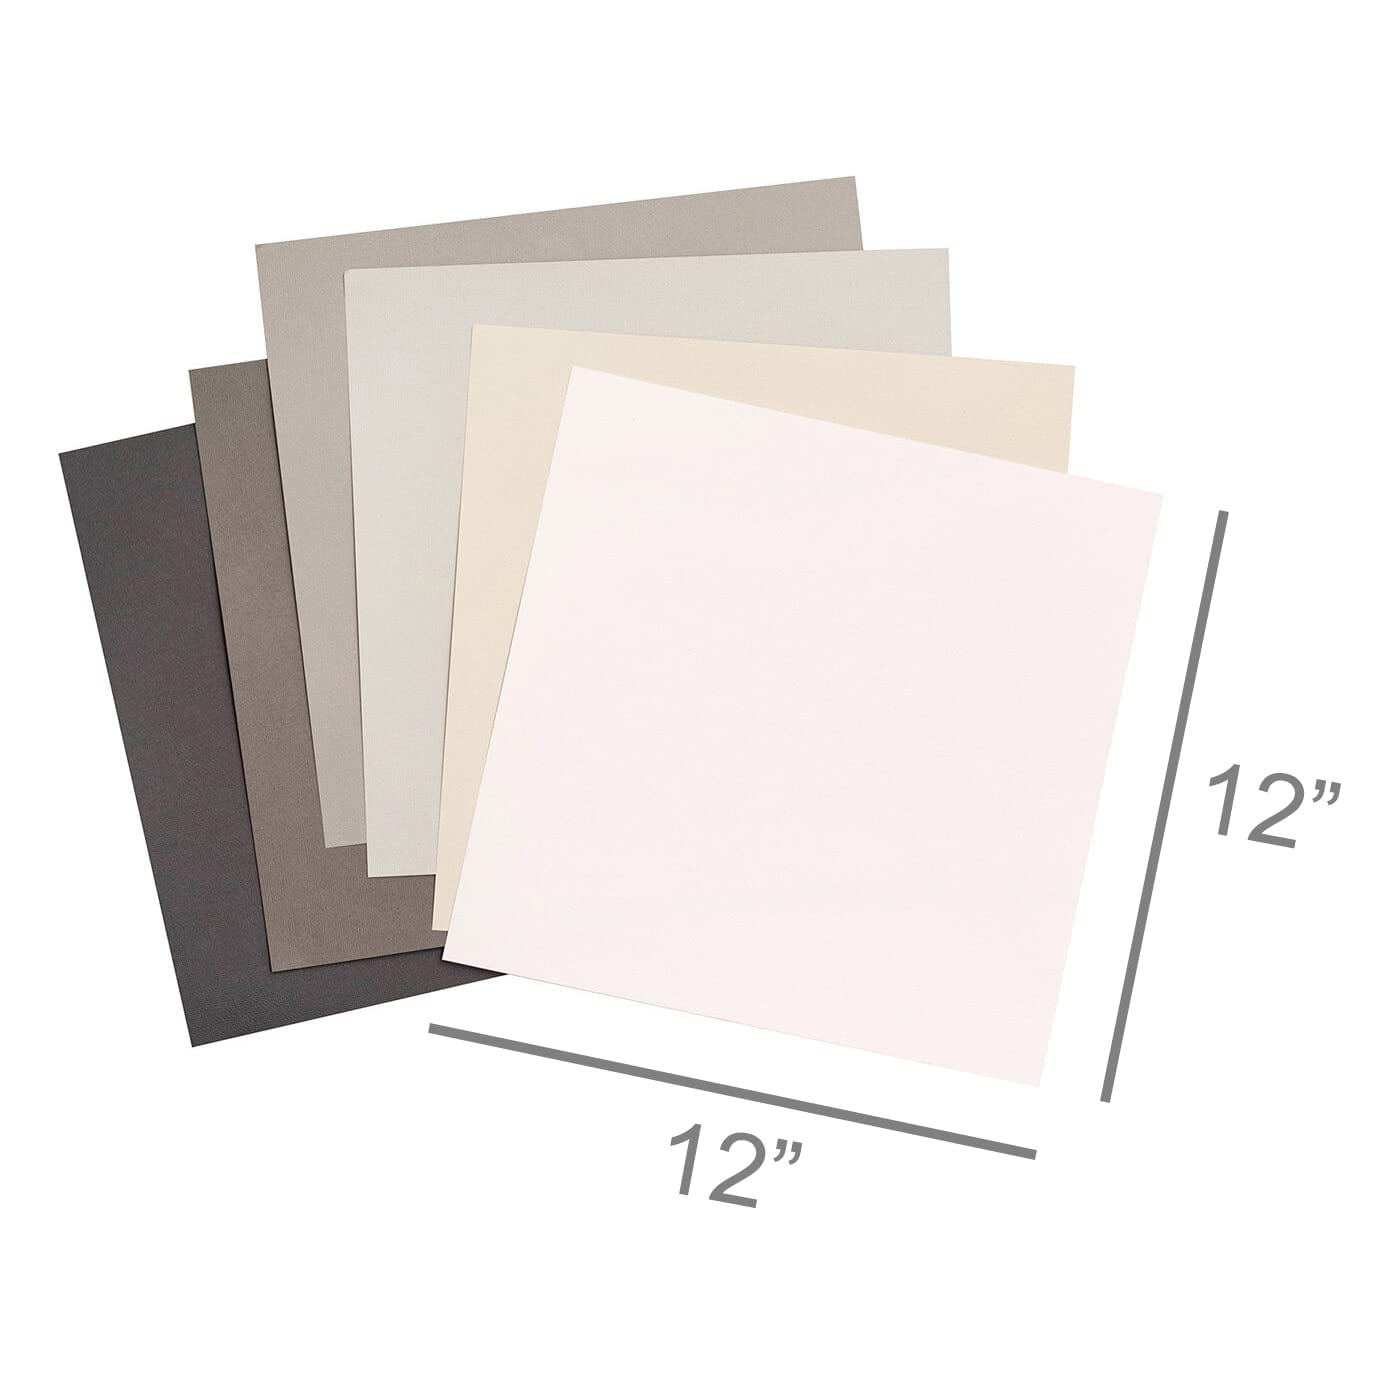 EXTRACT 12-x-12 Cardstock Variety Pack (10 colors / 3 each) - 30 PK